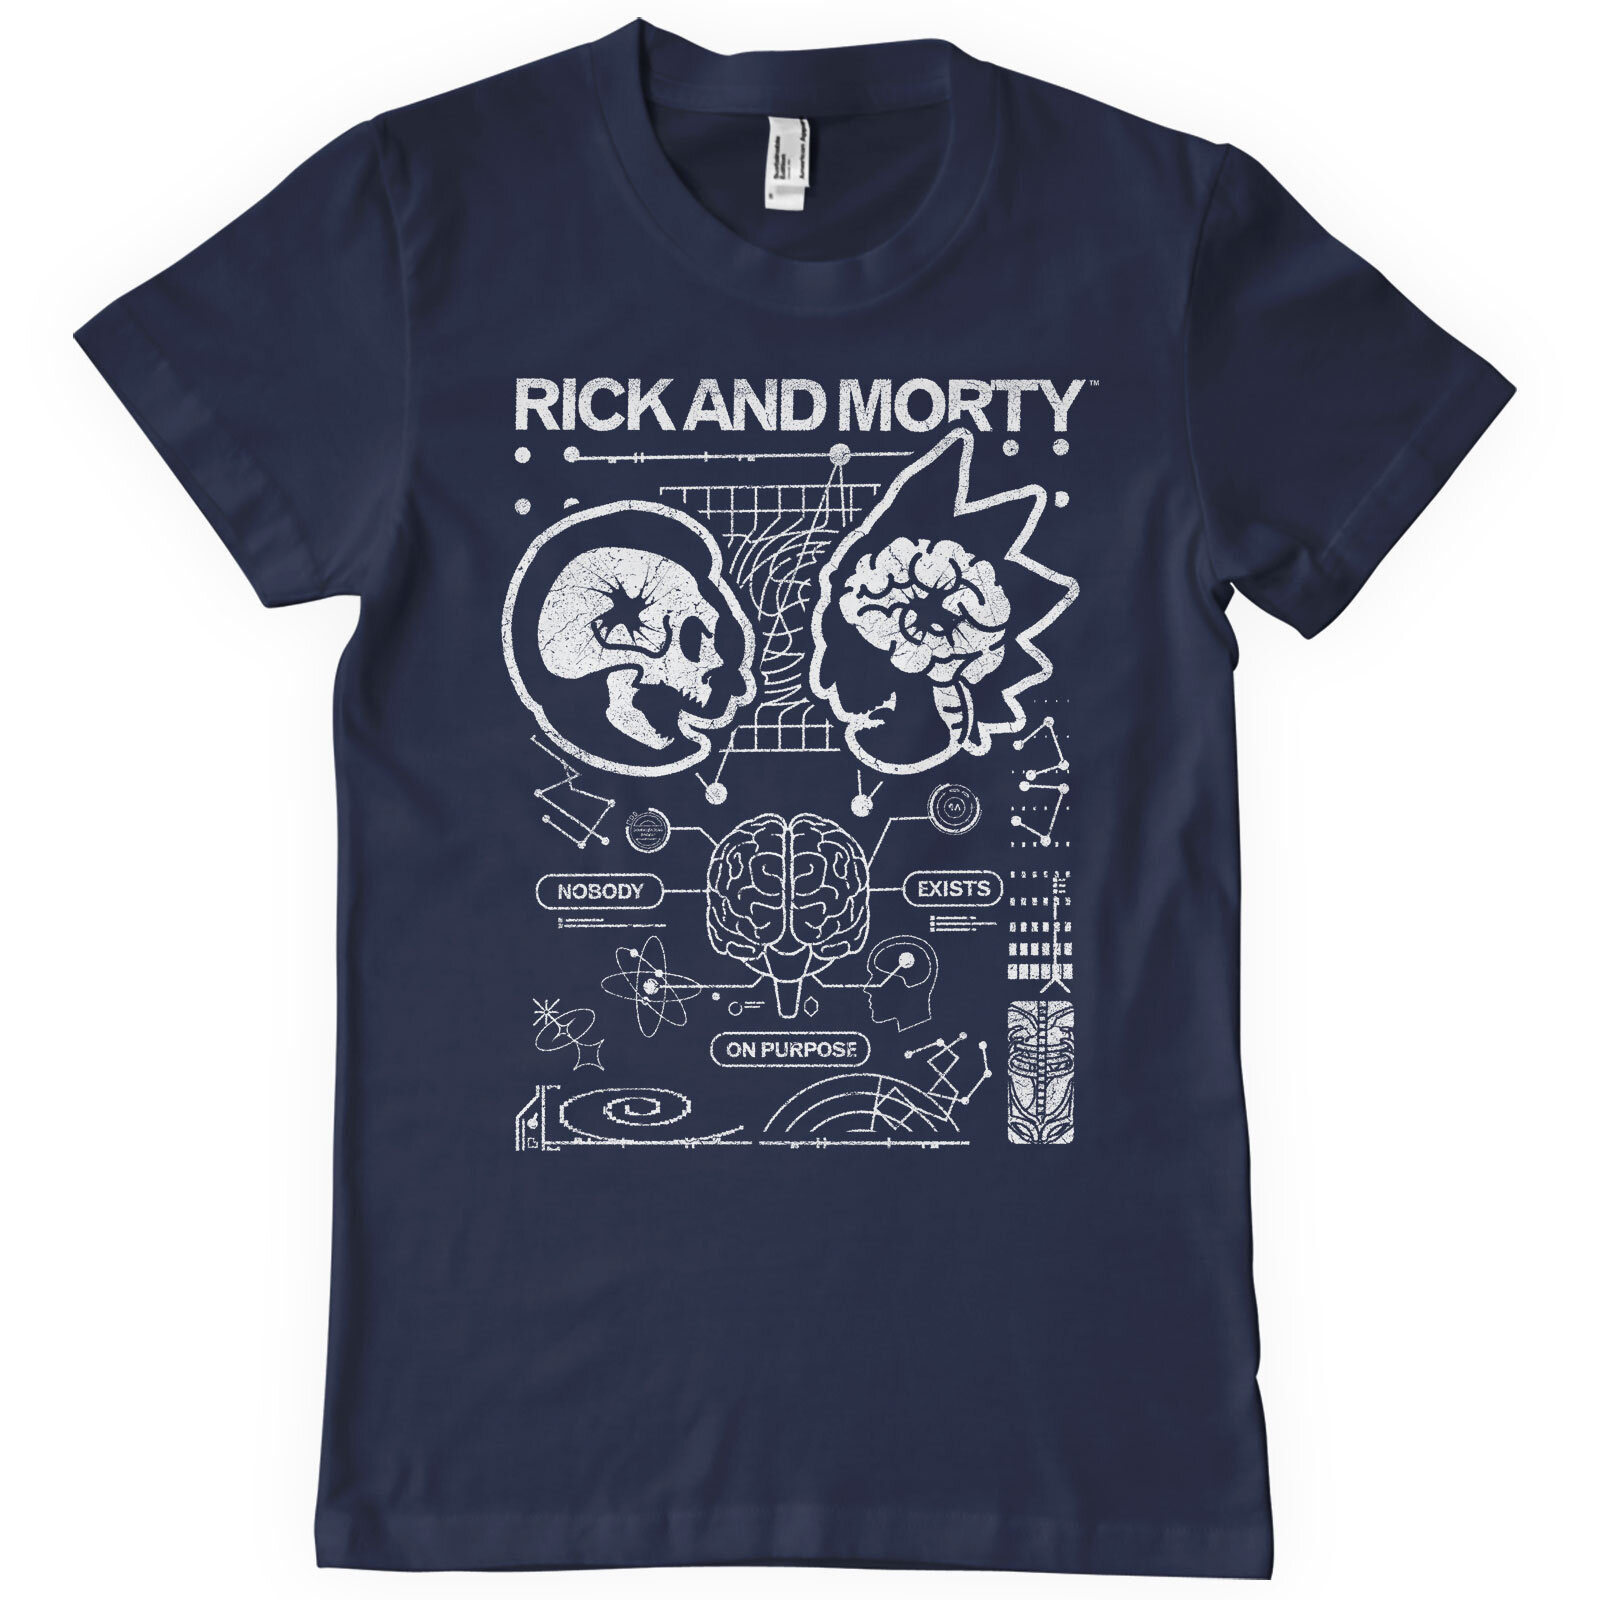 Rick and Morty - Nobody Exists On Purpuse